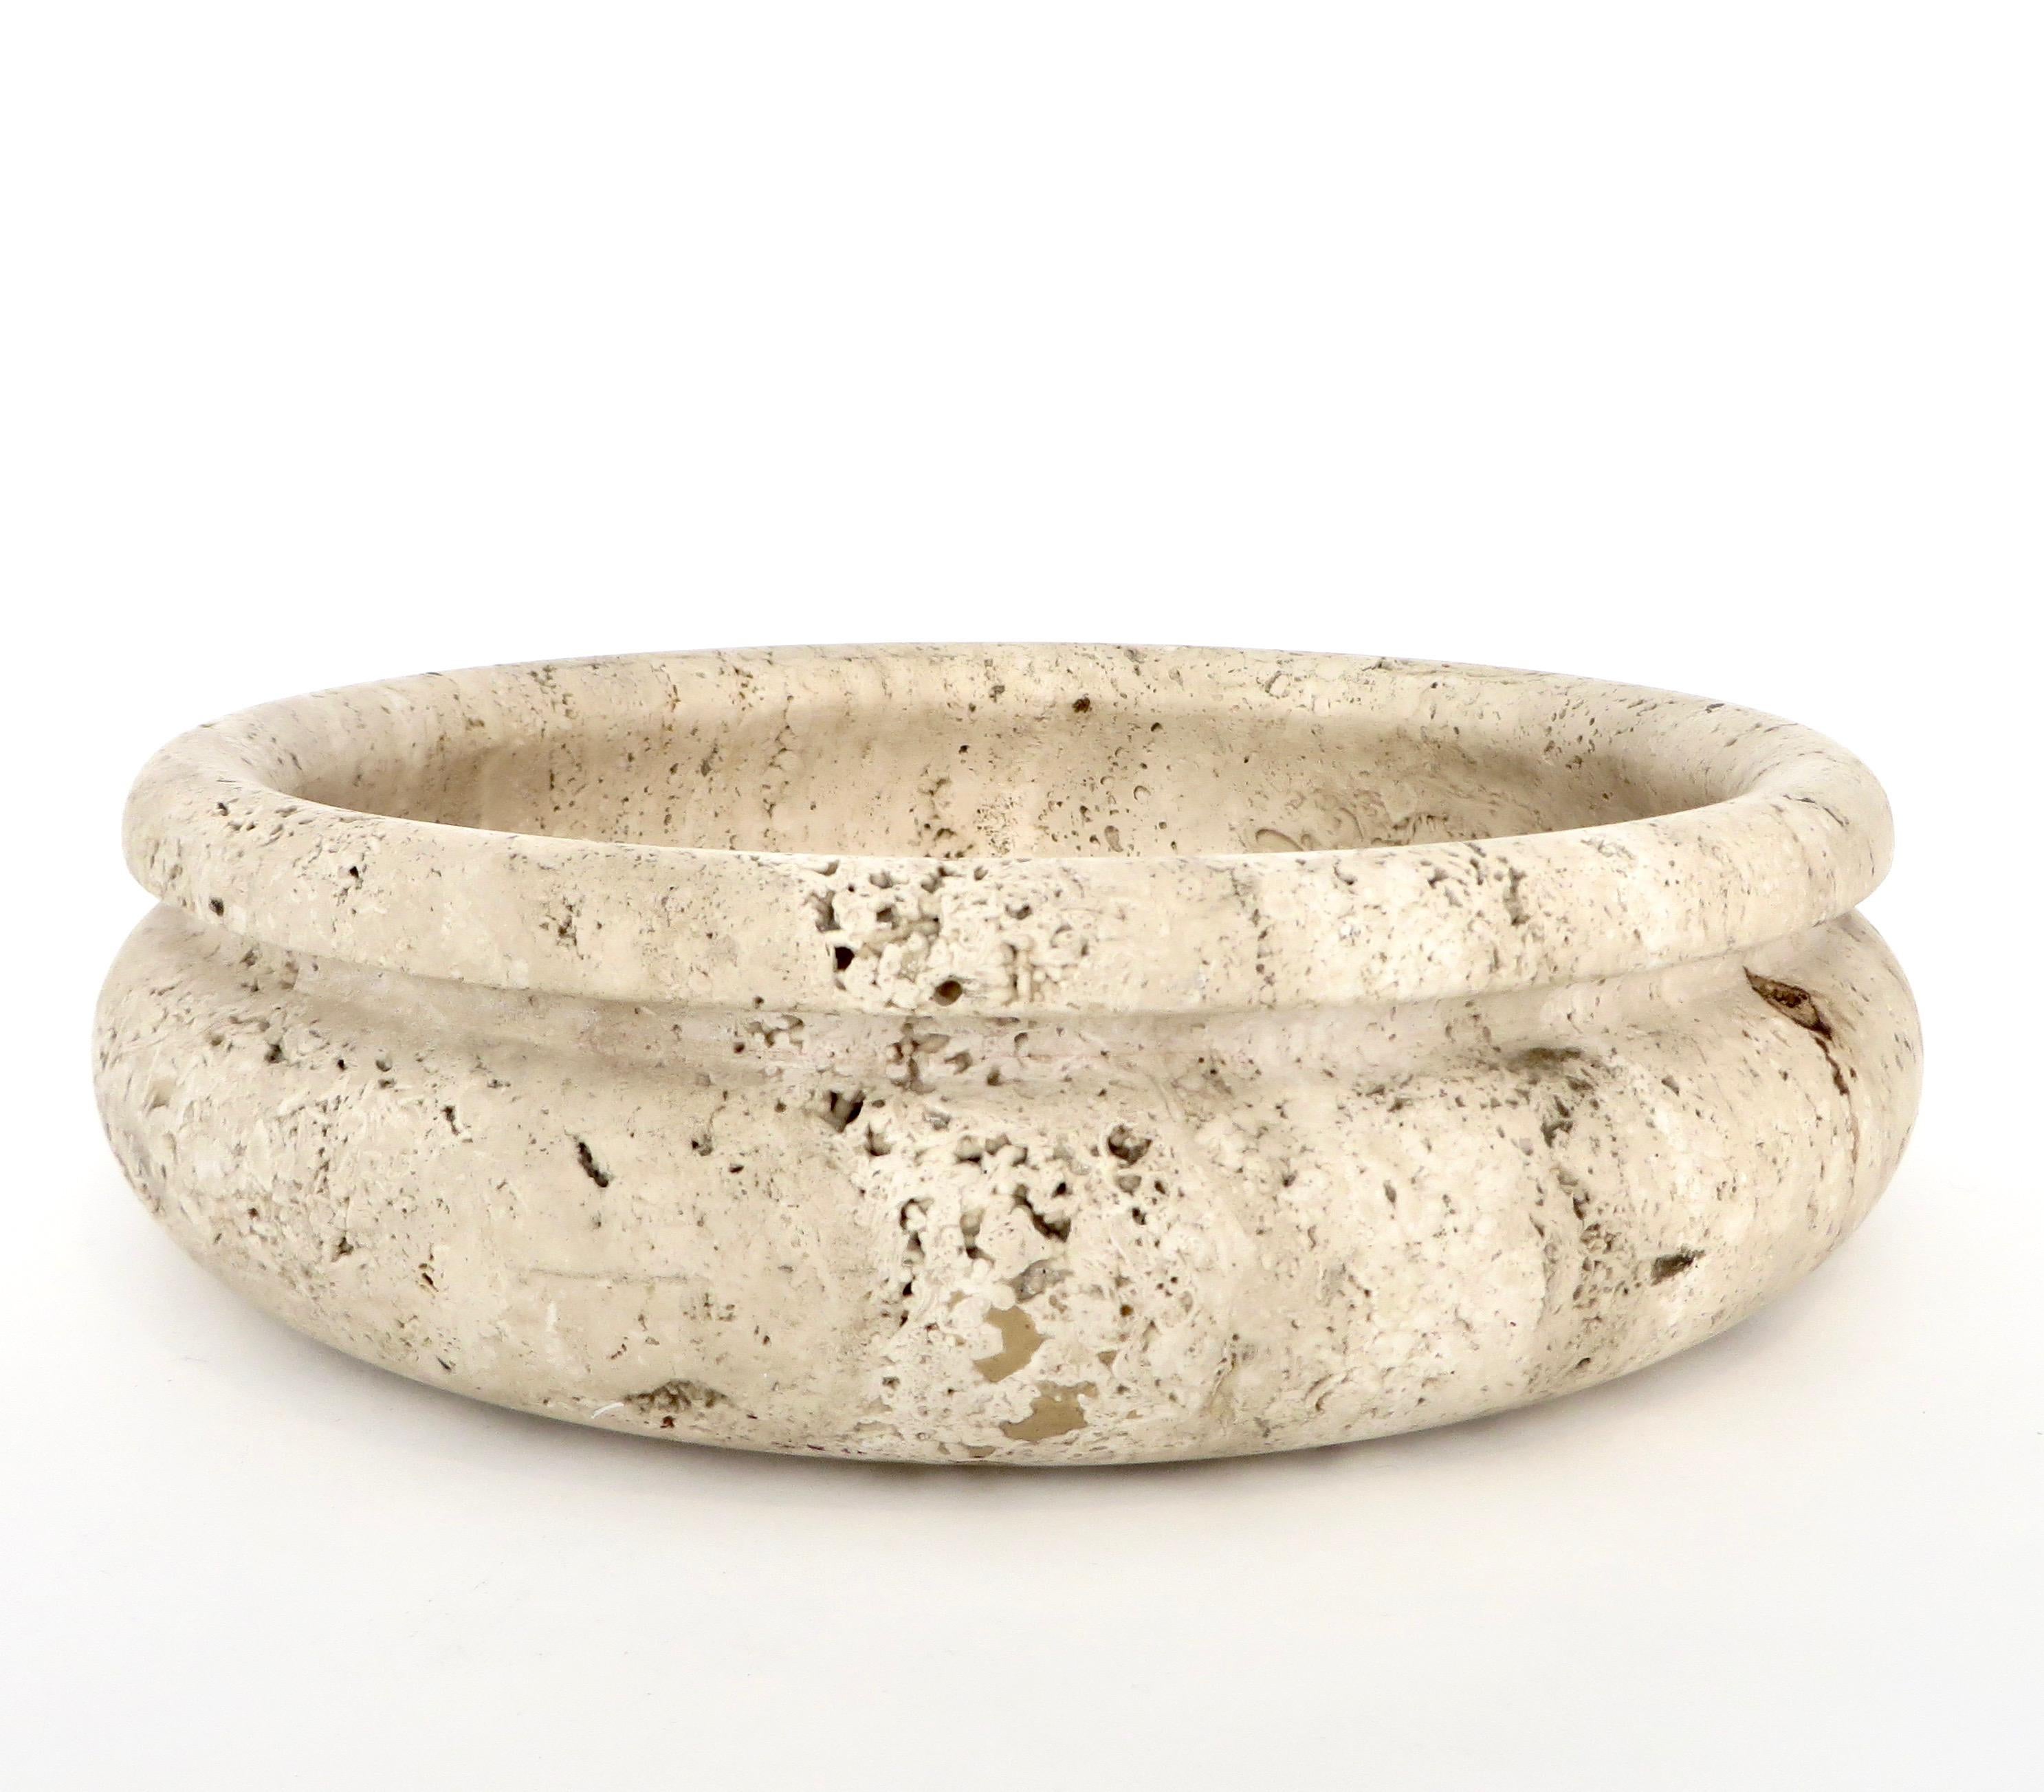 Late 20th Century Monumental Italian Travertine Marble Bowl or Dish for Up & Up Di Rosa and Giusti